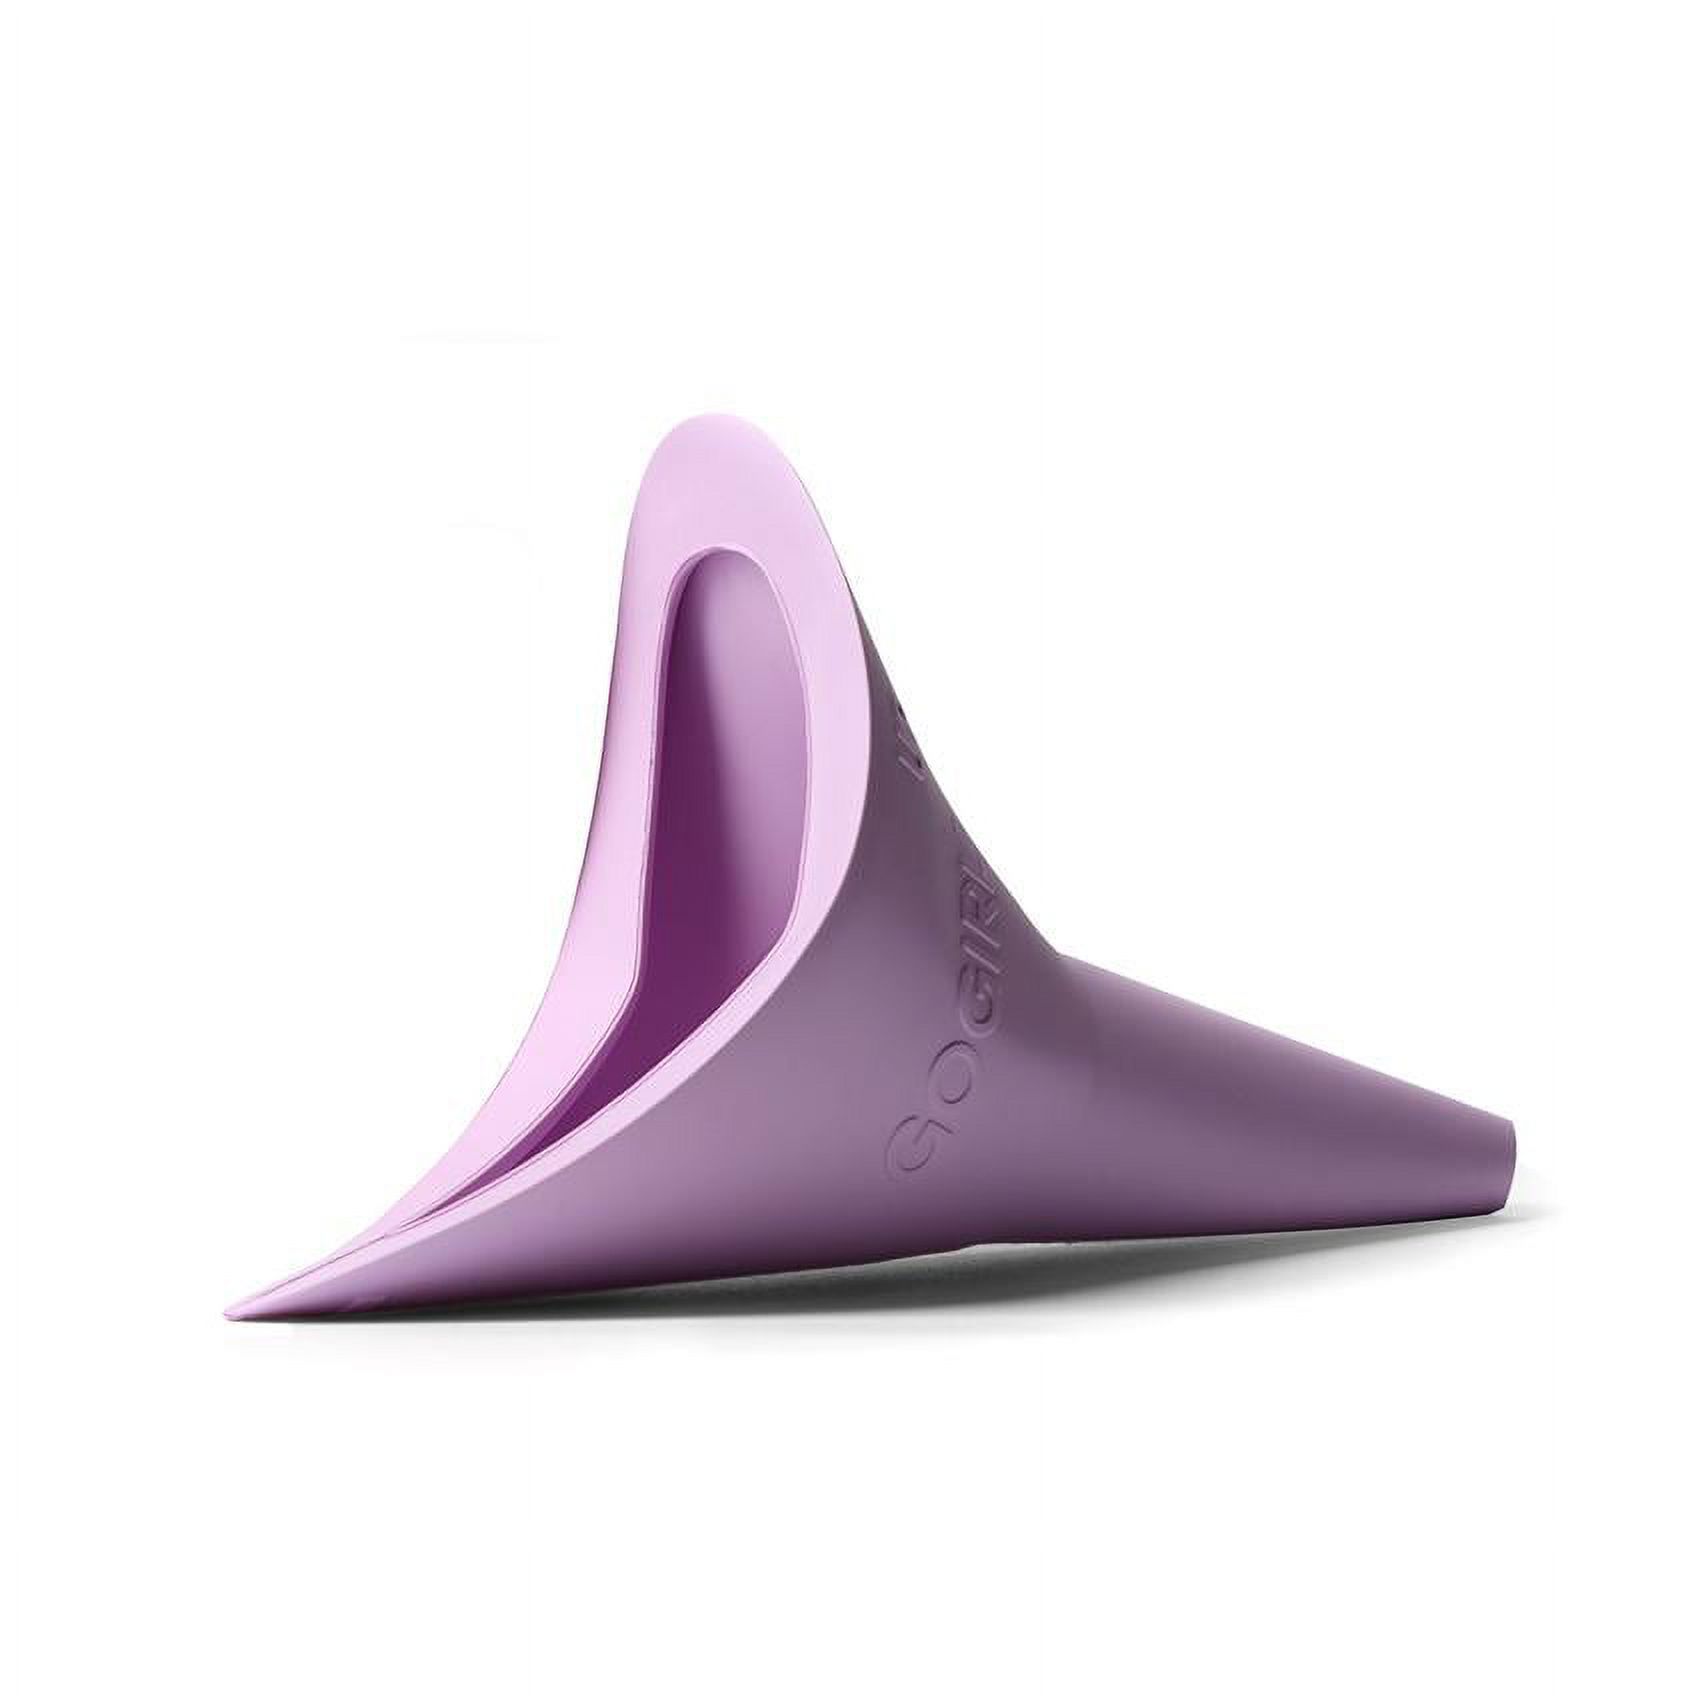 GoGirl Female Urination Device (FUD), Pink, Silicone, Resuable, and Travel Size funnel, 4.35 x 1.44 x 1.44inches - image 4 of 6